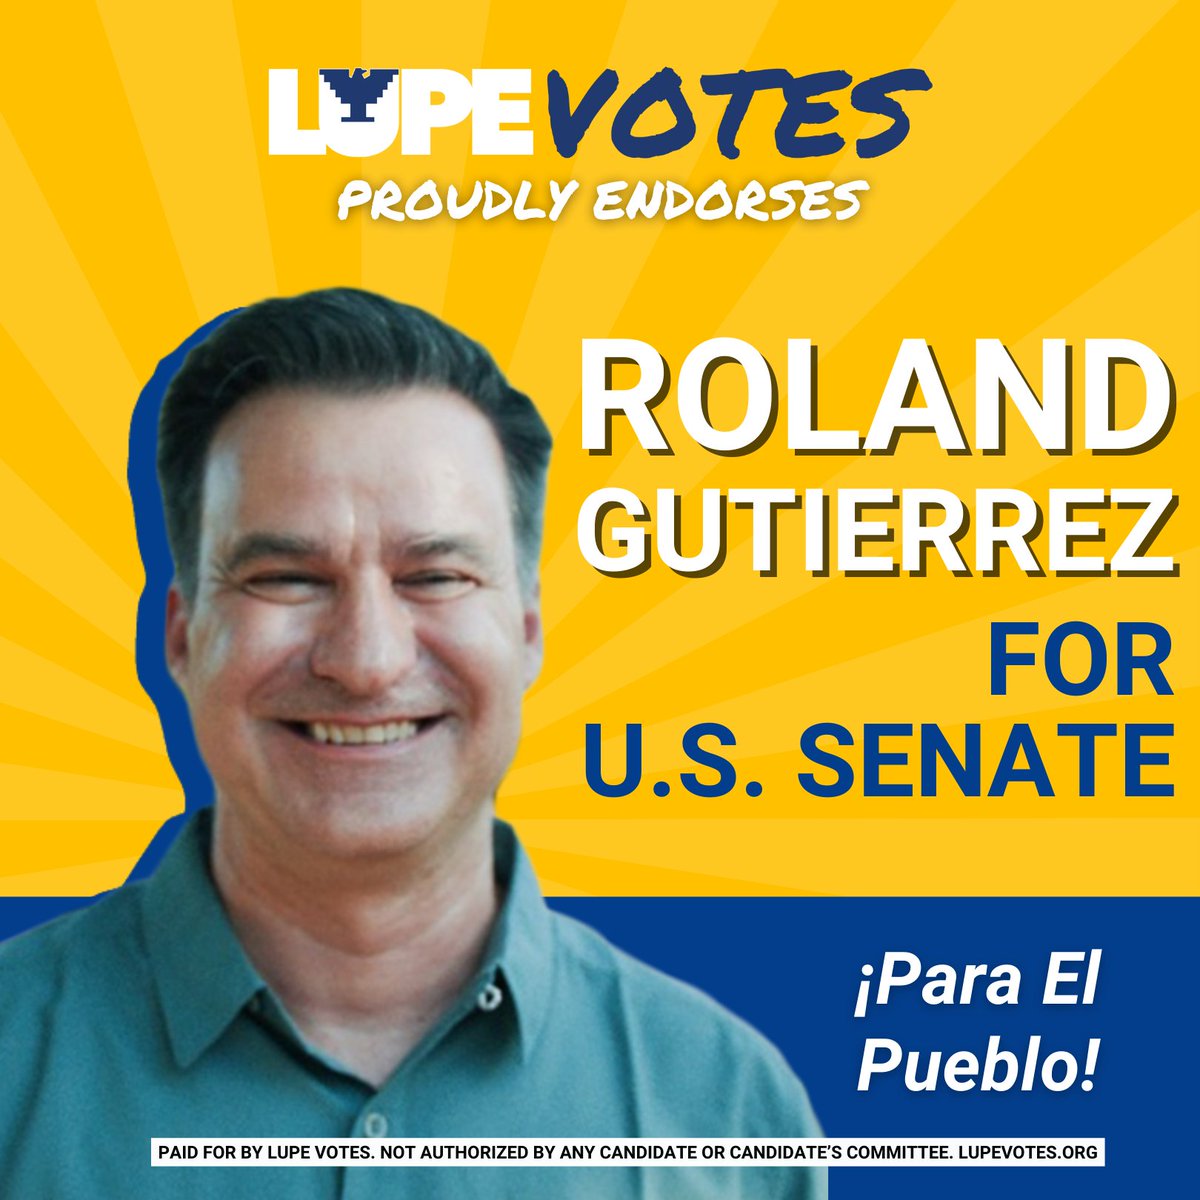 LUPE Votes is proud to endorse @RolandForTexas for U.S. Senate. Con Roland Gutierrez, ¡si se puede! Join our Pueblo Powered movement and sign up to volunteer at lupevotes.org/volunteer 📷